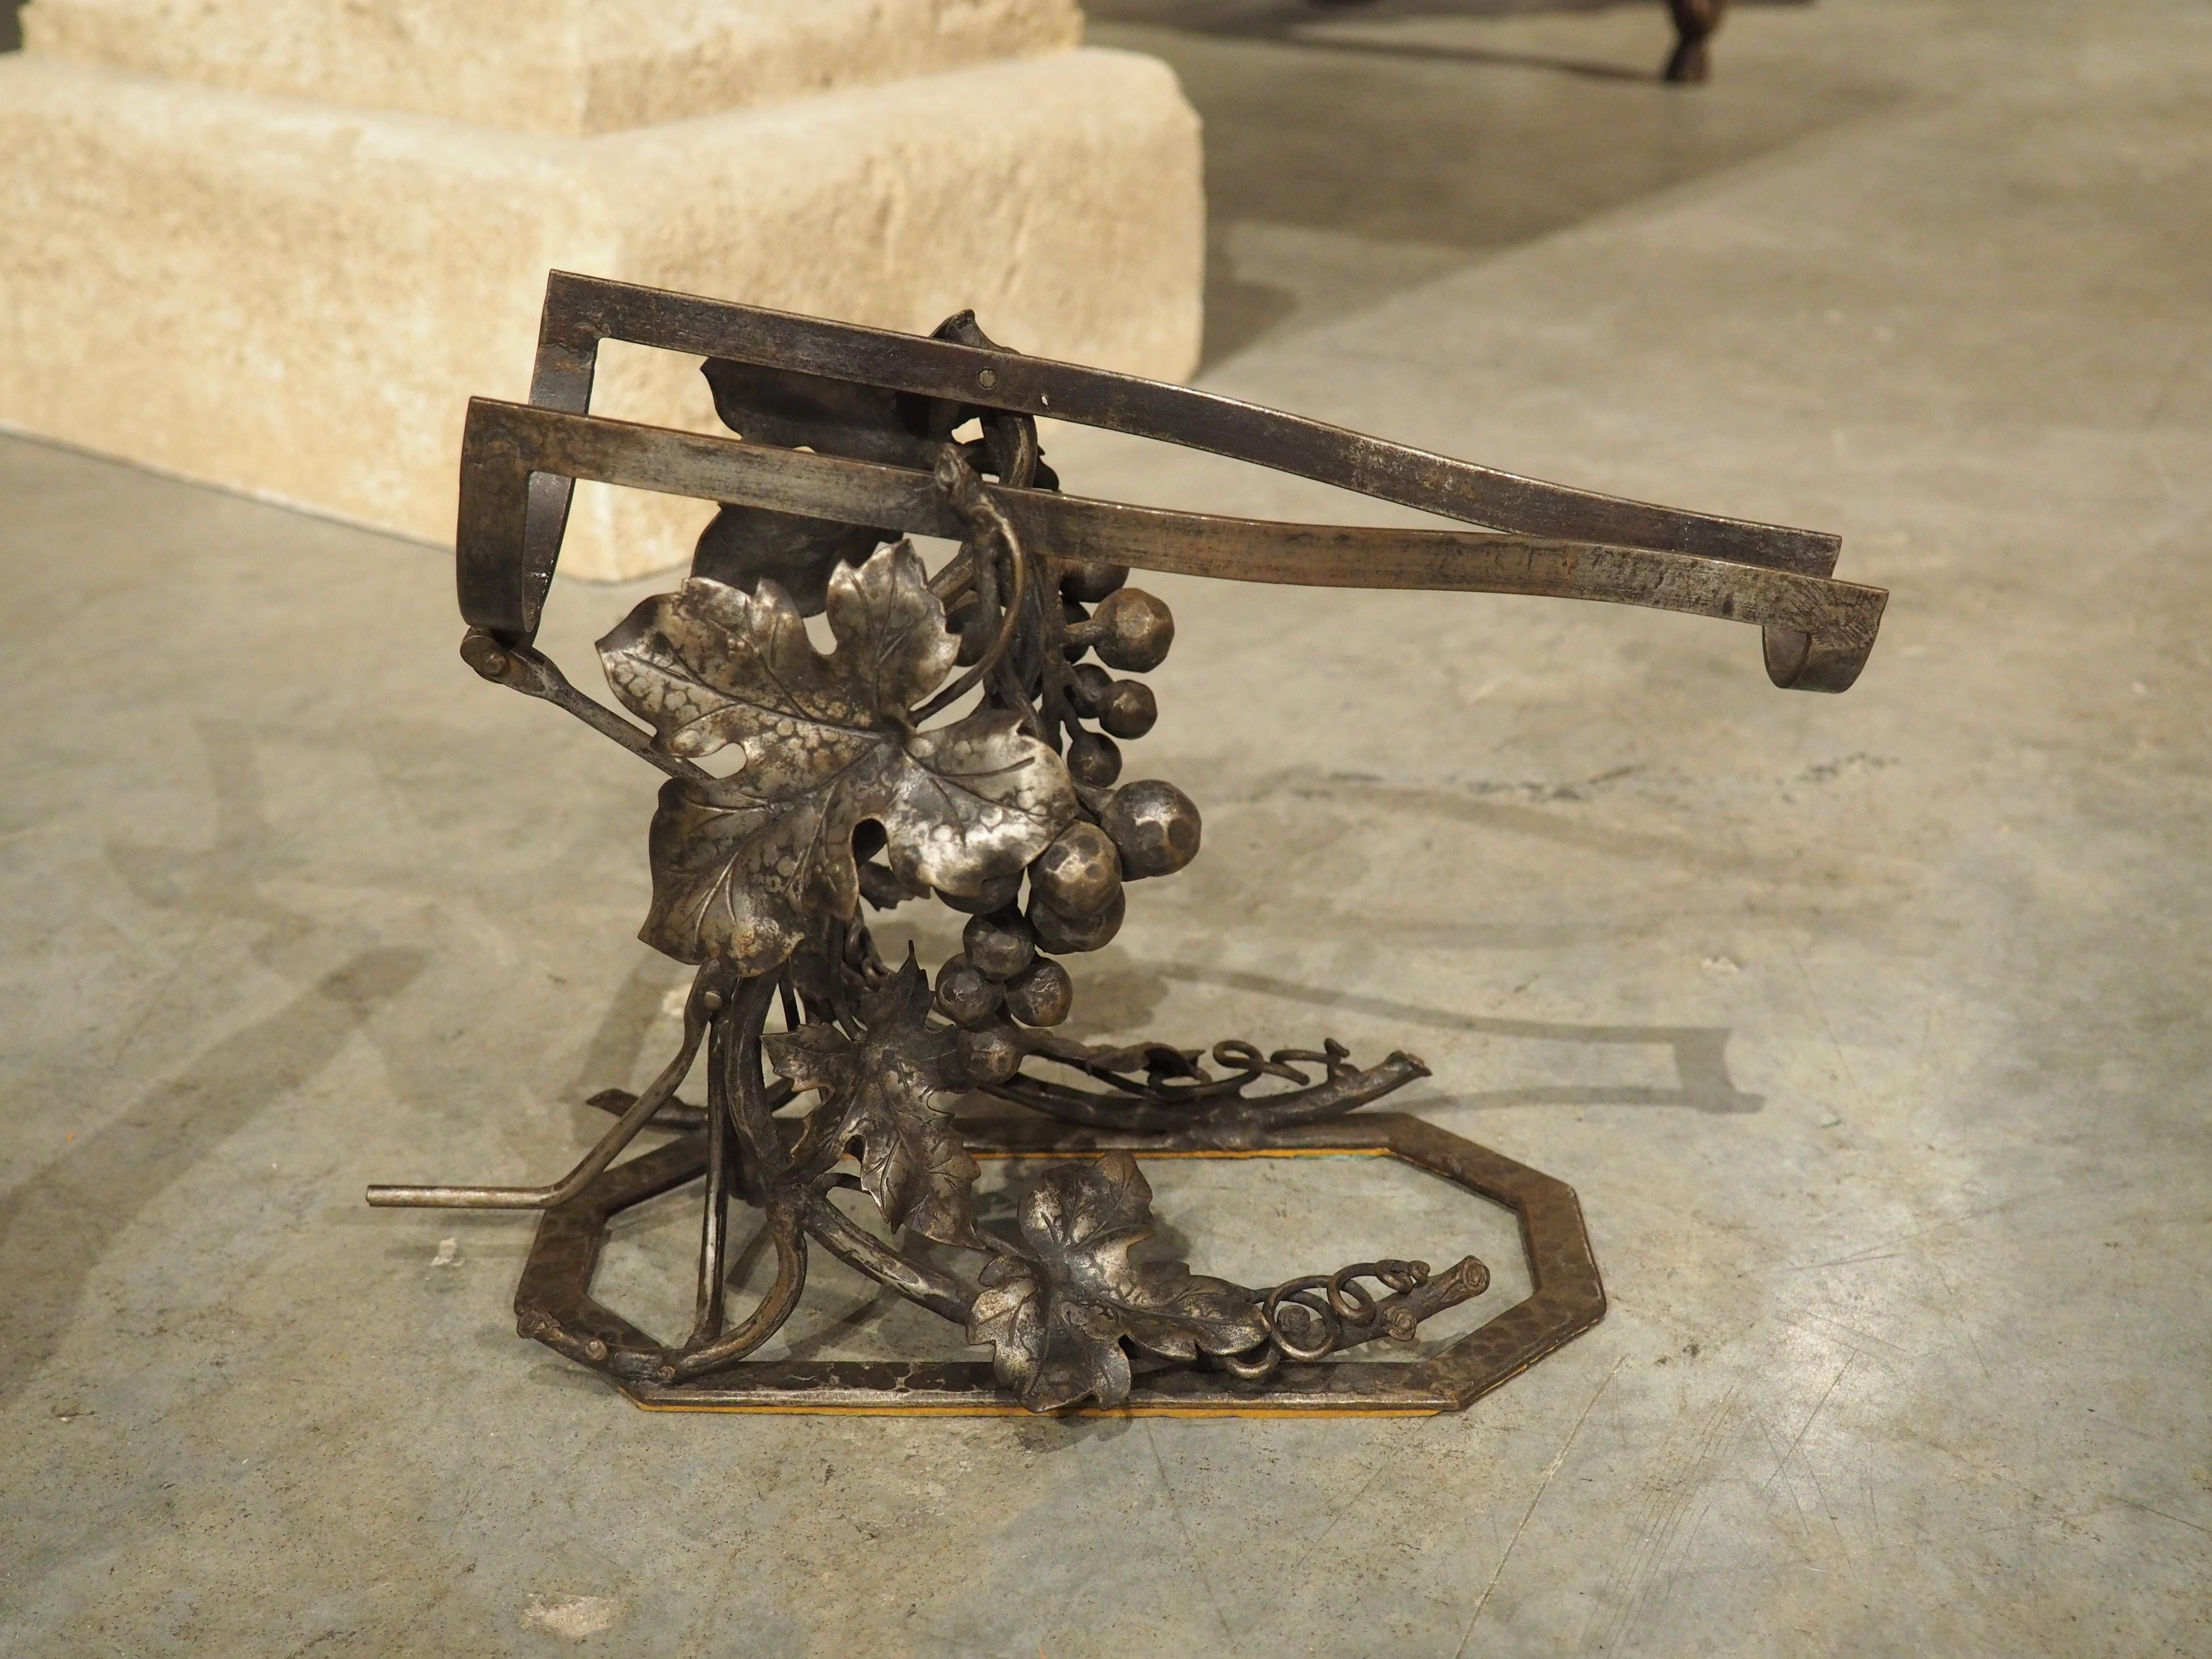 A charming wrought iron wine bottle cradle from France, circa 1900, this wine accessory features sprawling grapevines that run up each side, forming legs that are attached to an open octagonal base with a dappled appearance. The cradle is hinged,